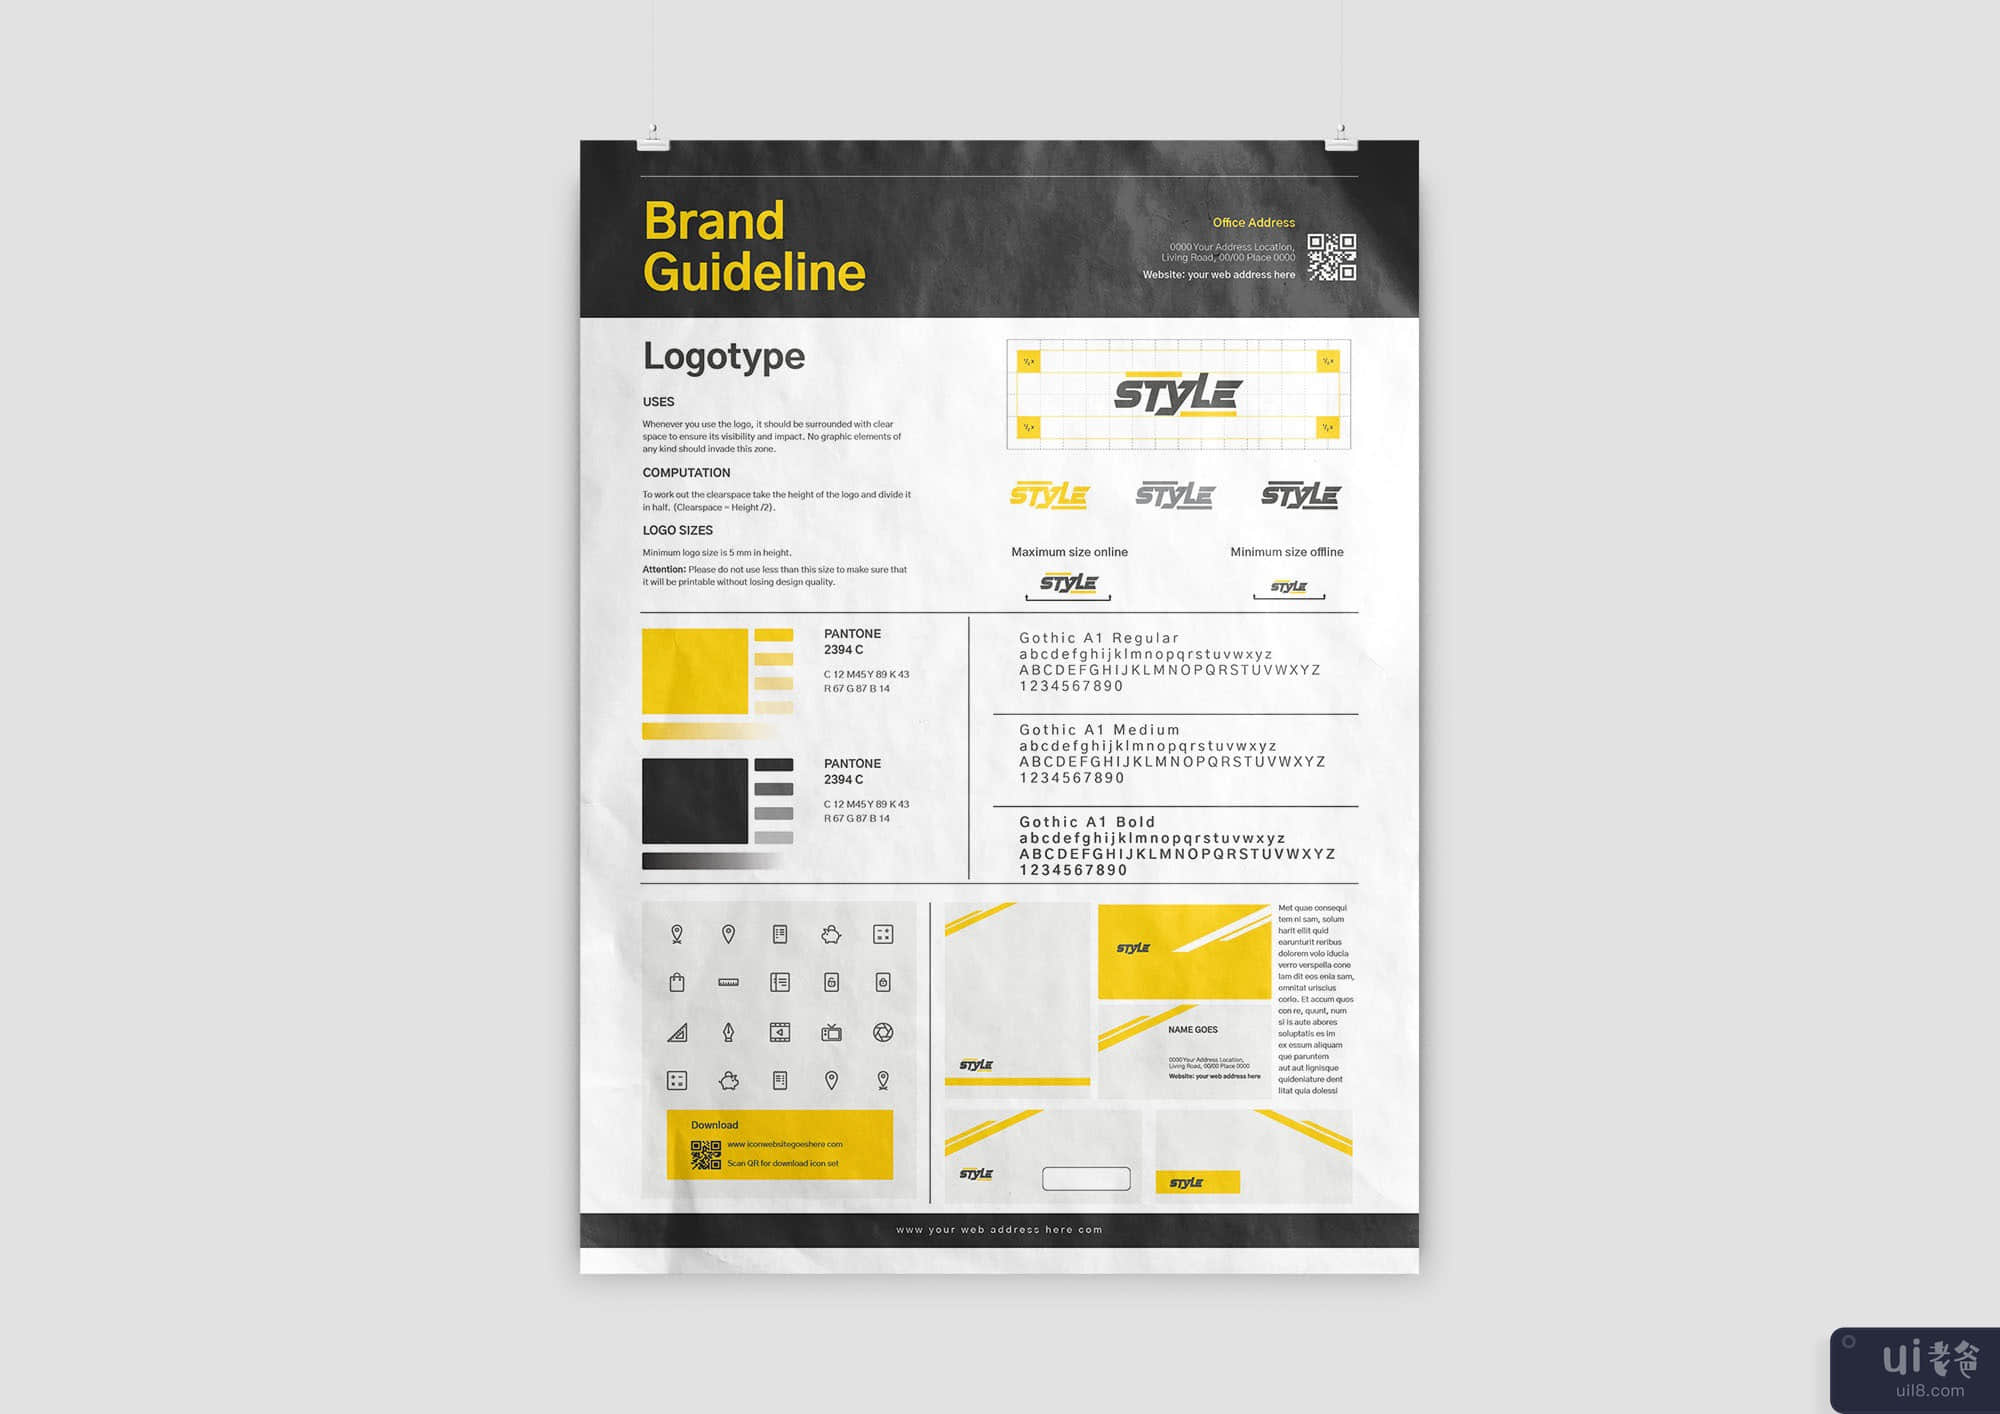 A3 品牌指南海报 Din A3 品牌指南海报(A3 Brand Guideline poster Din A3 Brand Guideline poster)插图2